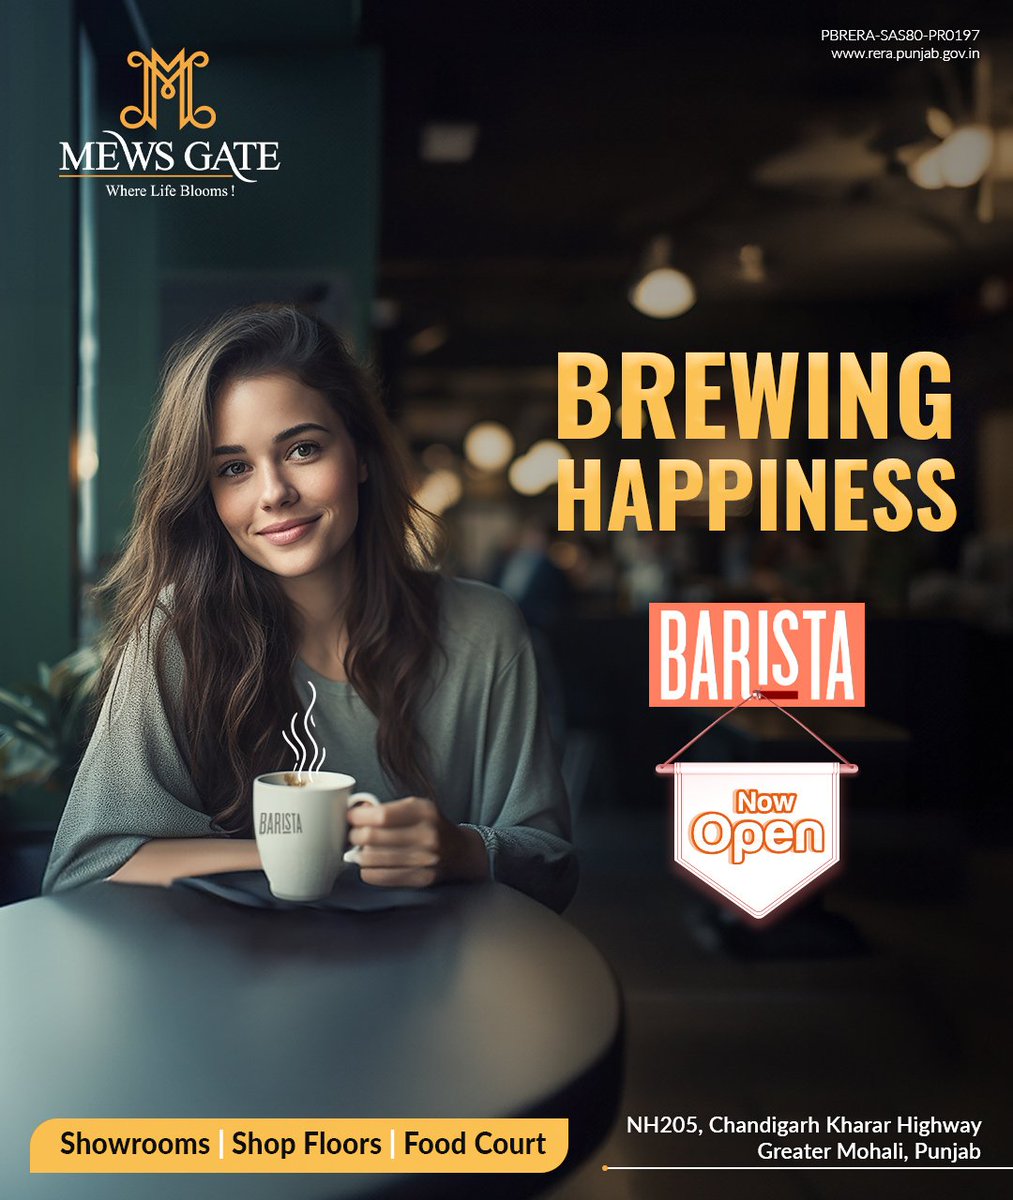 Happiness is a freshly brewed cup of coffee. Barista is now open at Mews Gate. Showrooms | Shop Floors | Food Court 📍NH 205, Chandigarh Kharar Highway Greater Mohali, Punjab ↘️ Call us at 90695-90695 #MewsGate #Barista #CoffeeTime #CoffeeLovers #Food #Foodie #FoodJoint